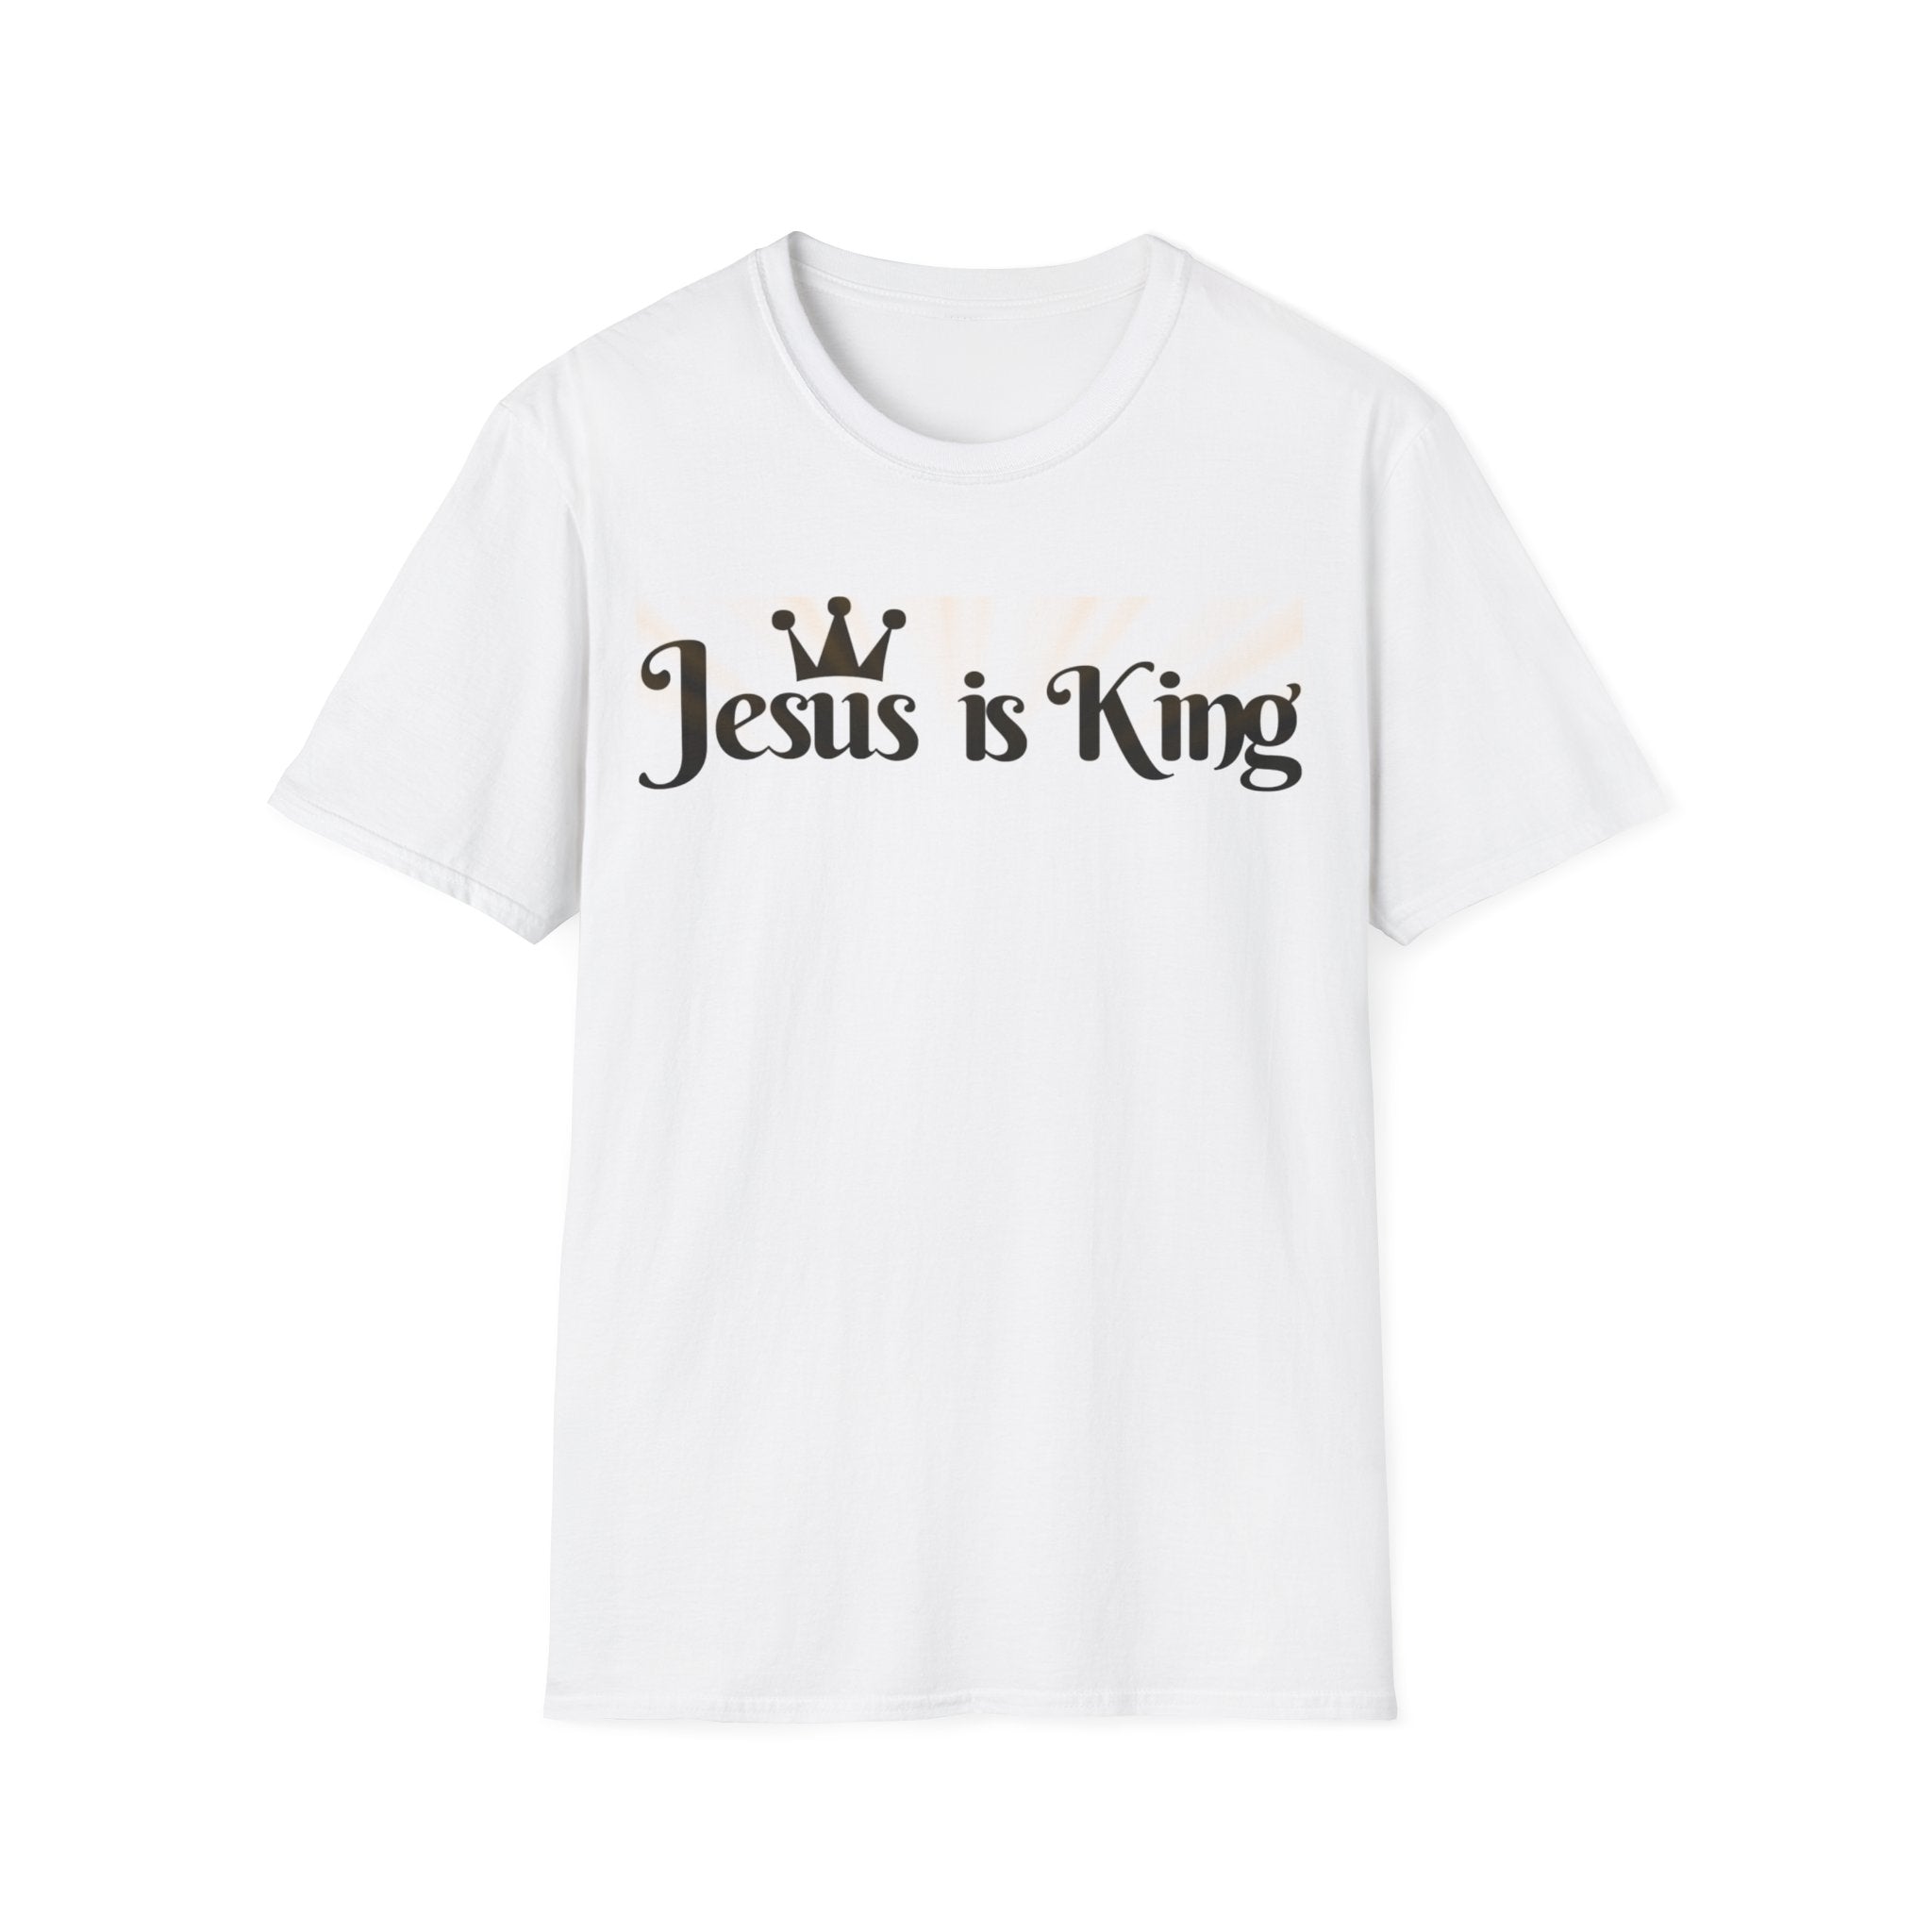 Jesus is King Men's Softstyle T-Shirt